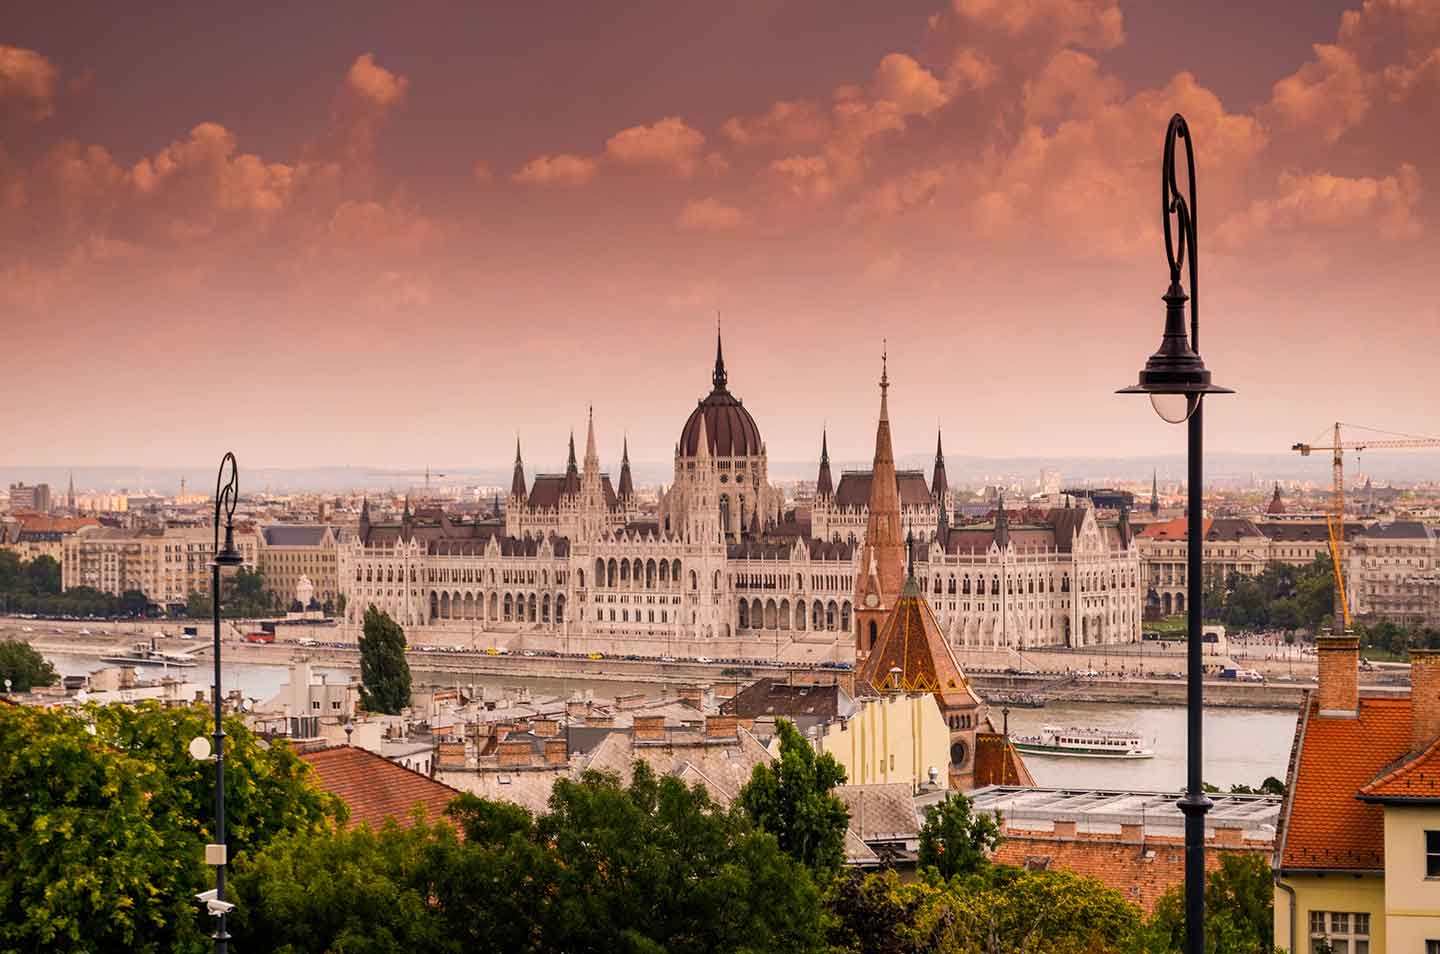 Hungary - All invoices will have to be declared online as of January 1, 2021.